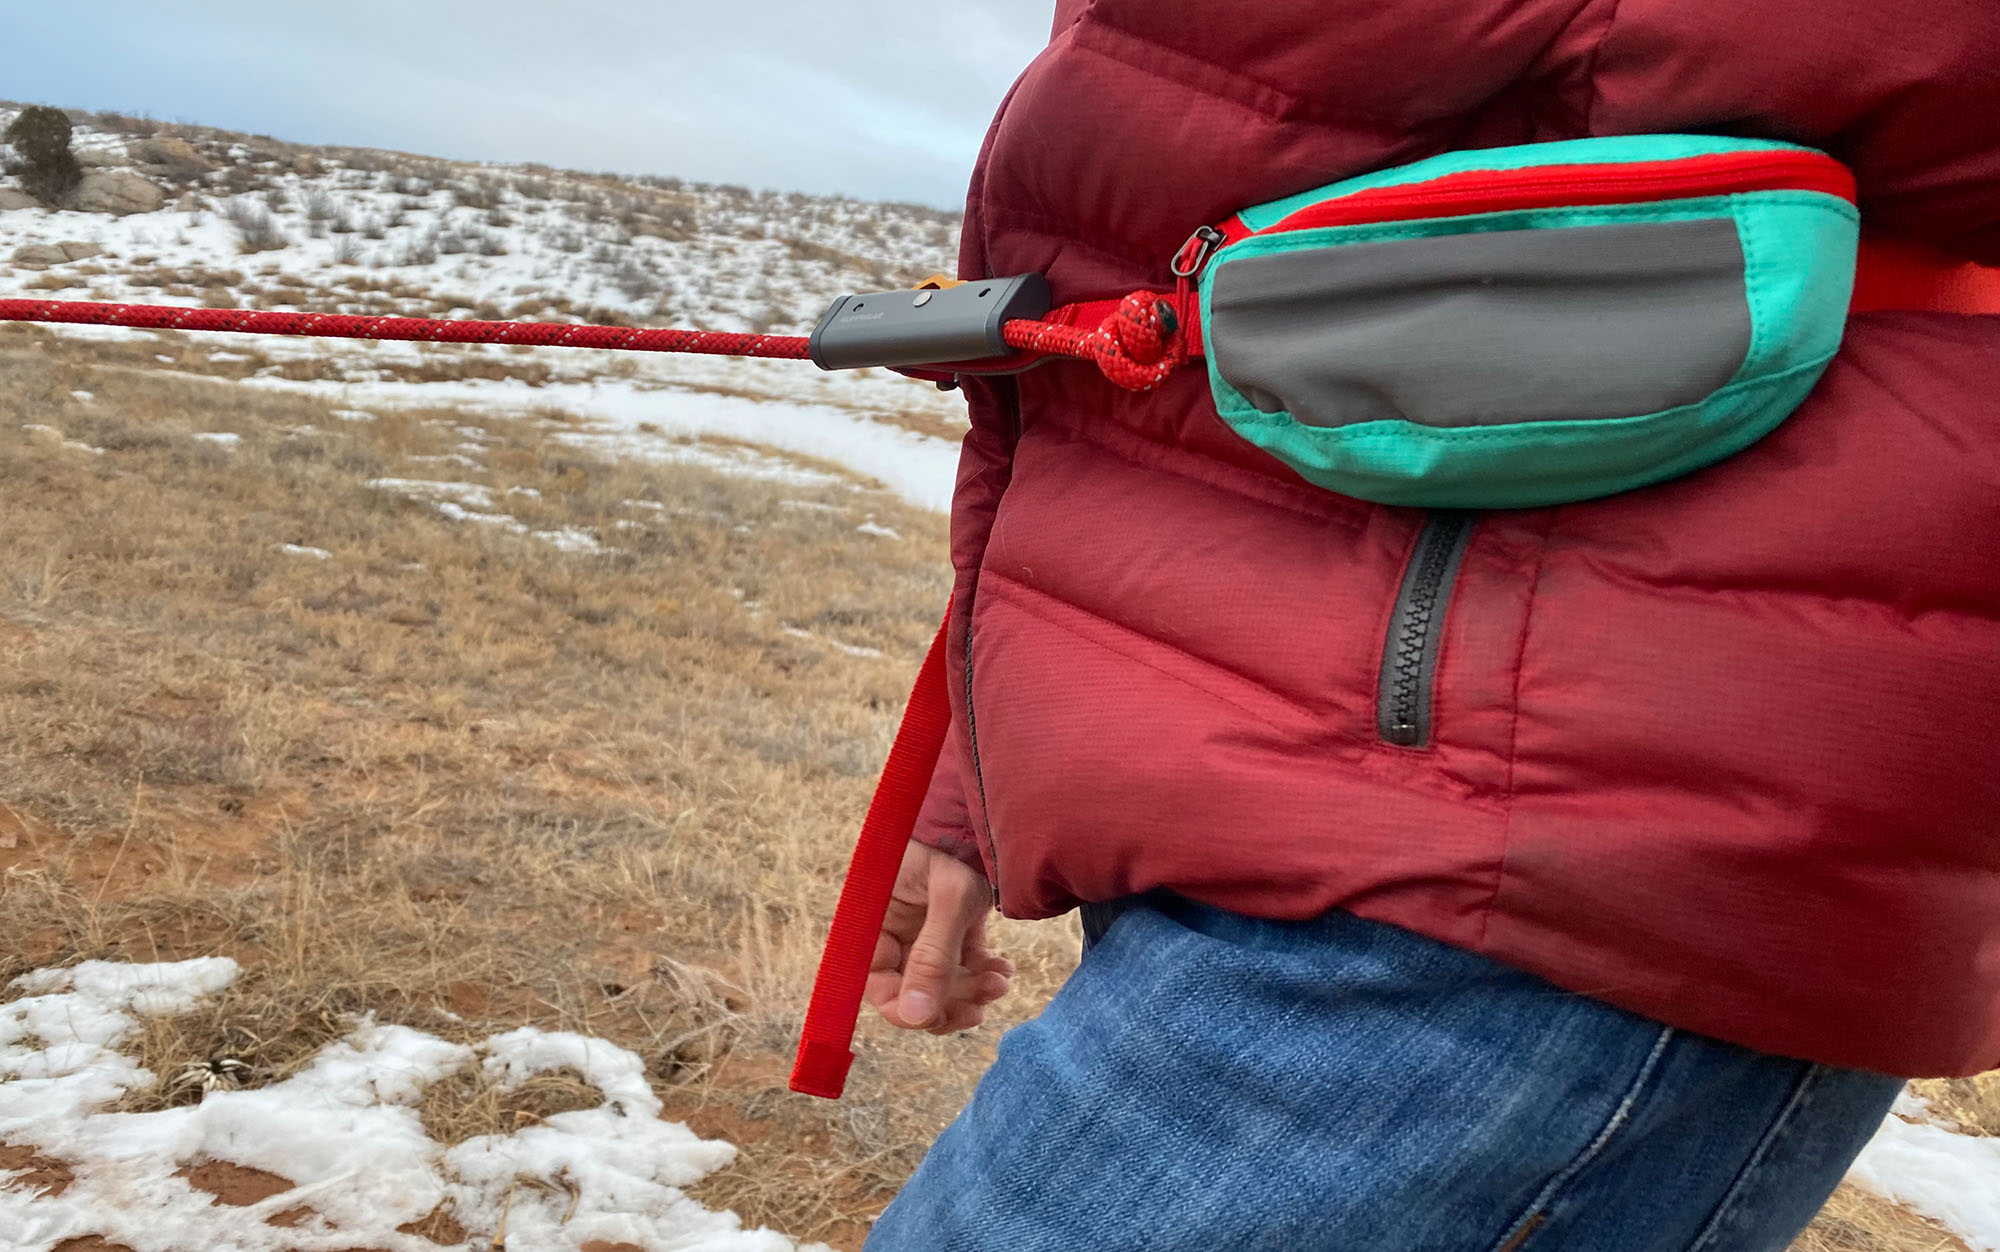 This leash belt pairs great with one of the best dog harnesses for hiking handsfree.